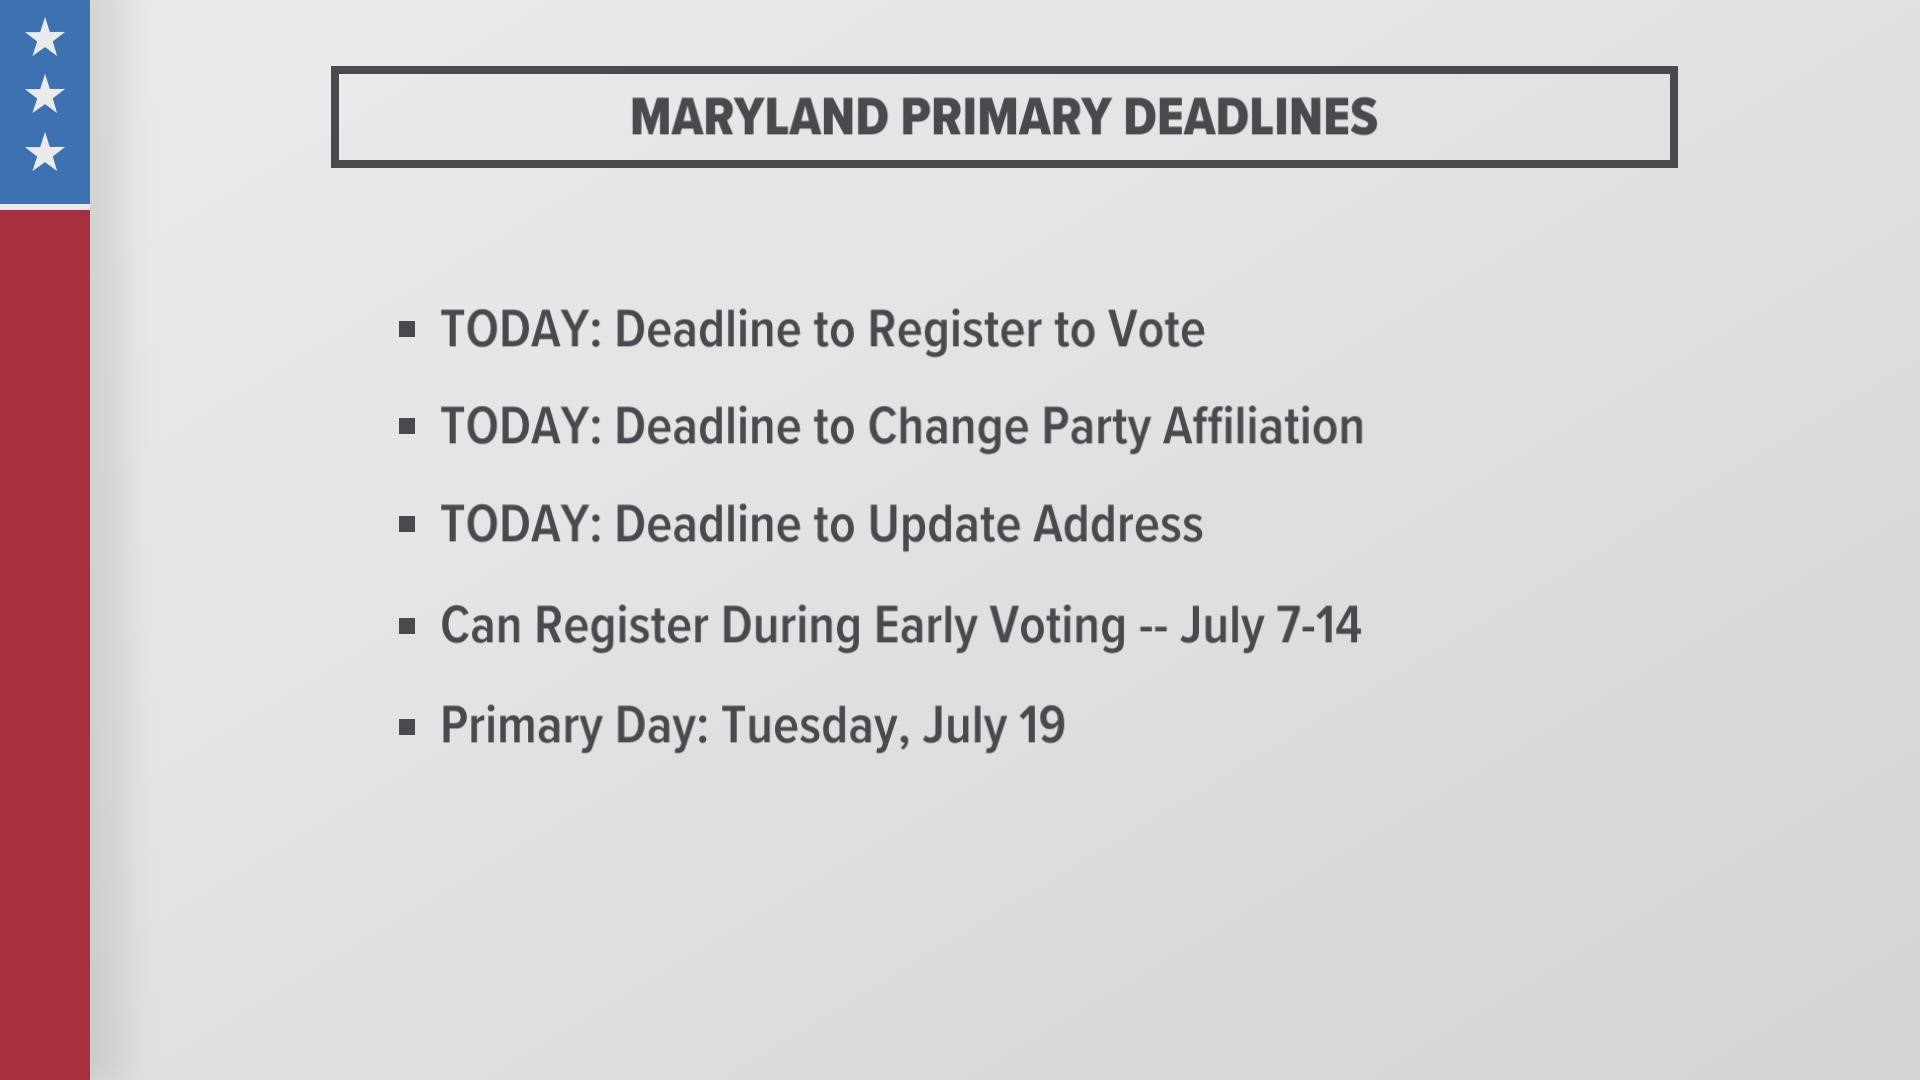 Primary Day for Maryland Day is on Tuesday, July 19. WUSA9 wants to remind residents today is their last day to update their name and address.